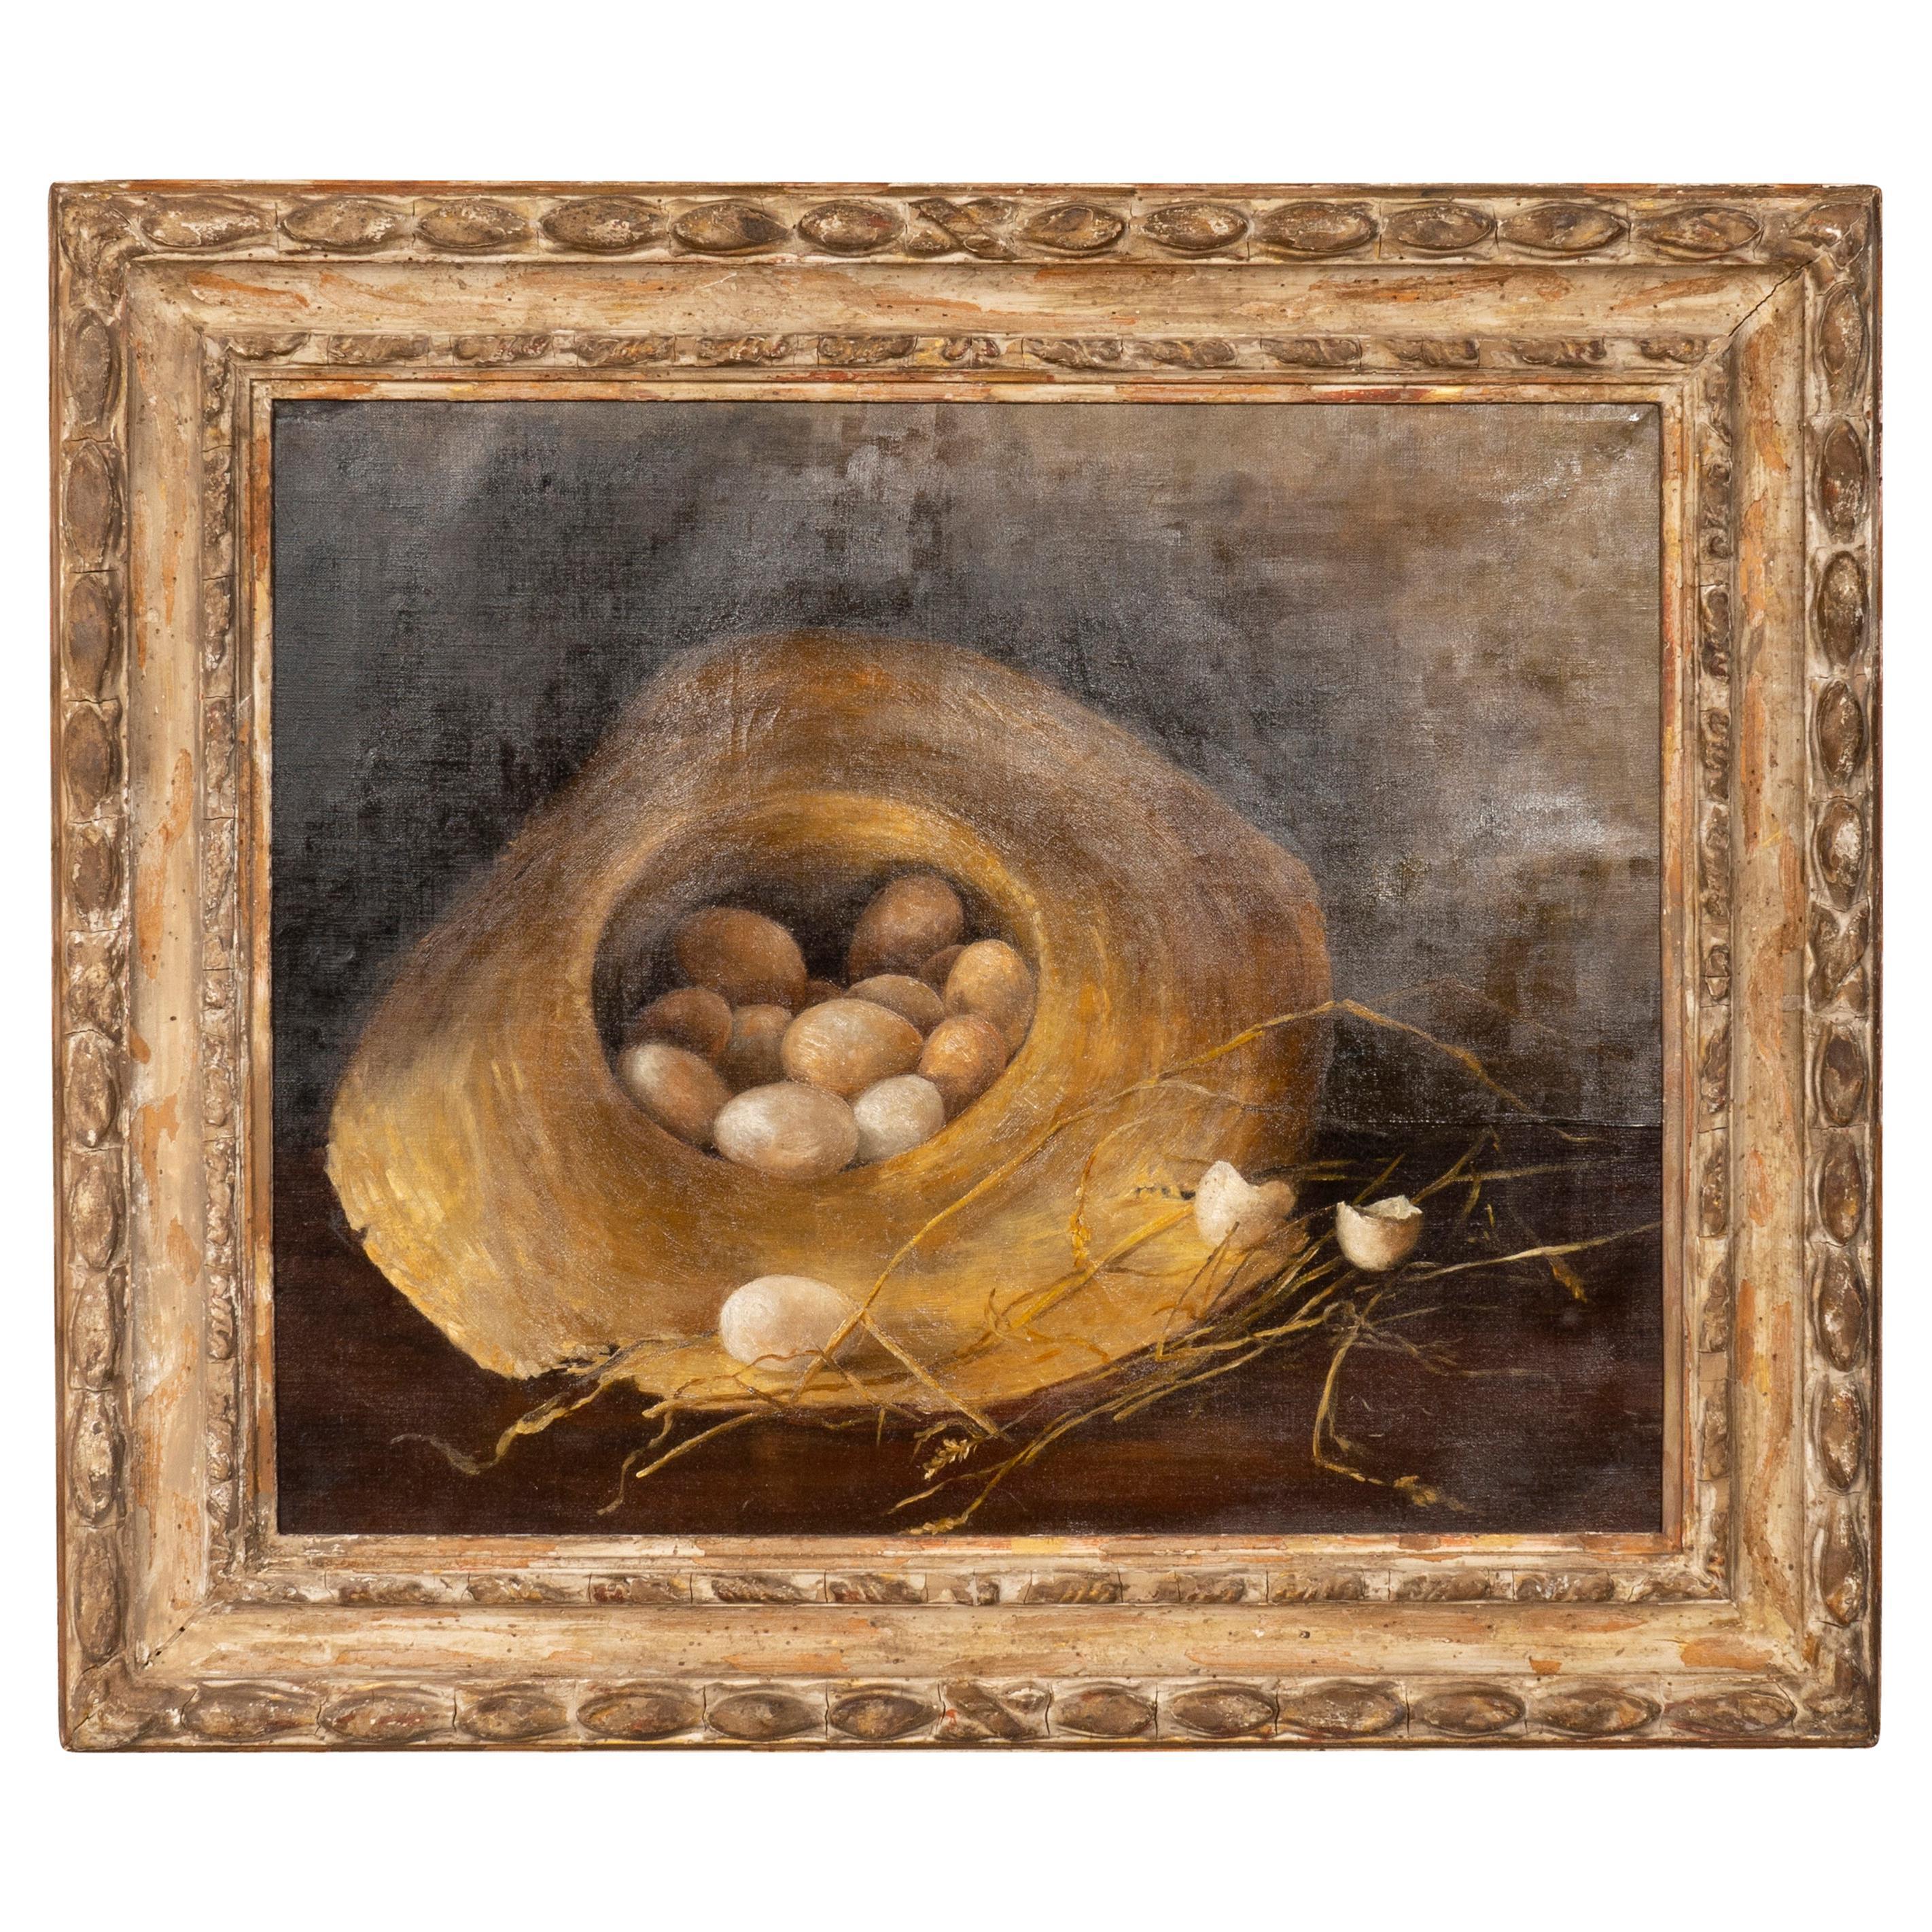  Framed Oil on Canvas "Eggs in a Straw Hat"